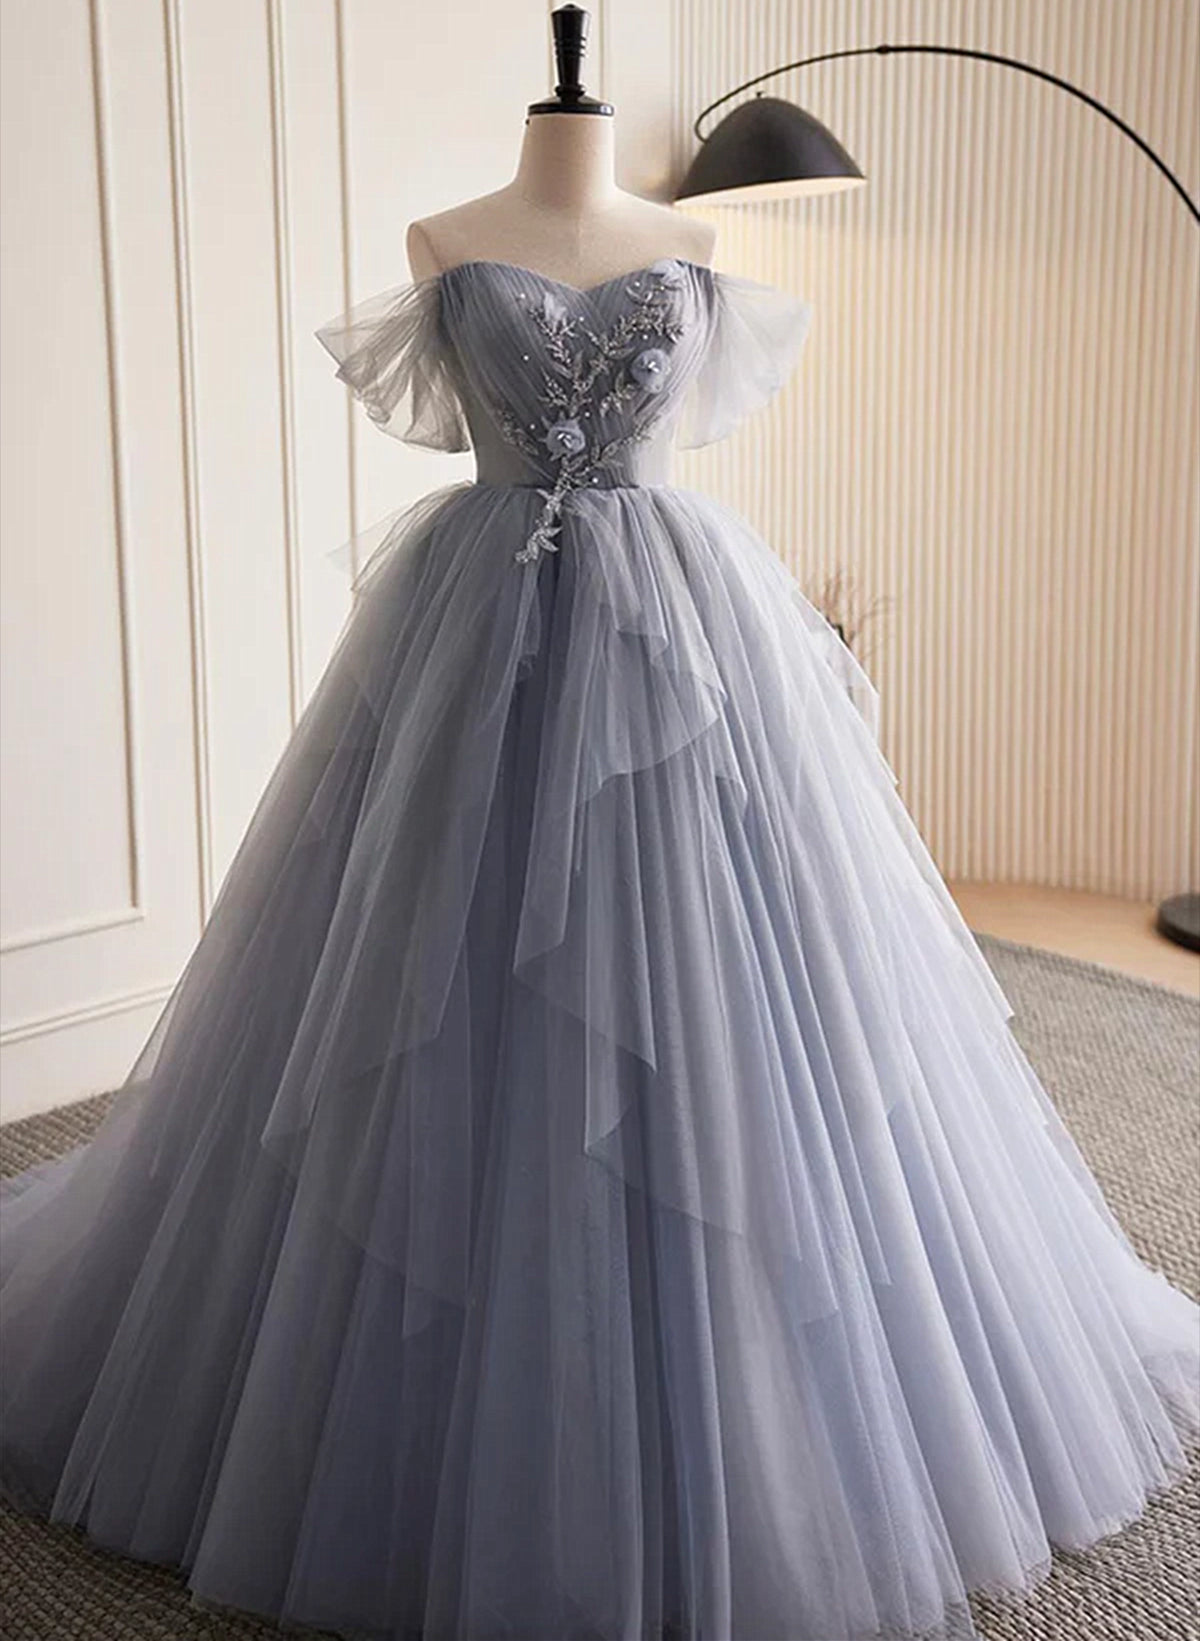 Glam Blue-Grey Tulle with Lace Applique Long Party Dress Outfits For Girls, Tulle Formal Dress Outfits For Women Evening Gown